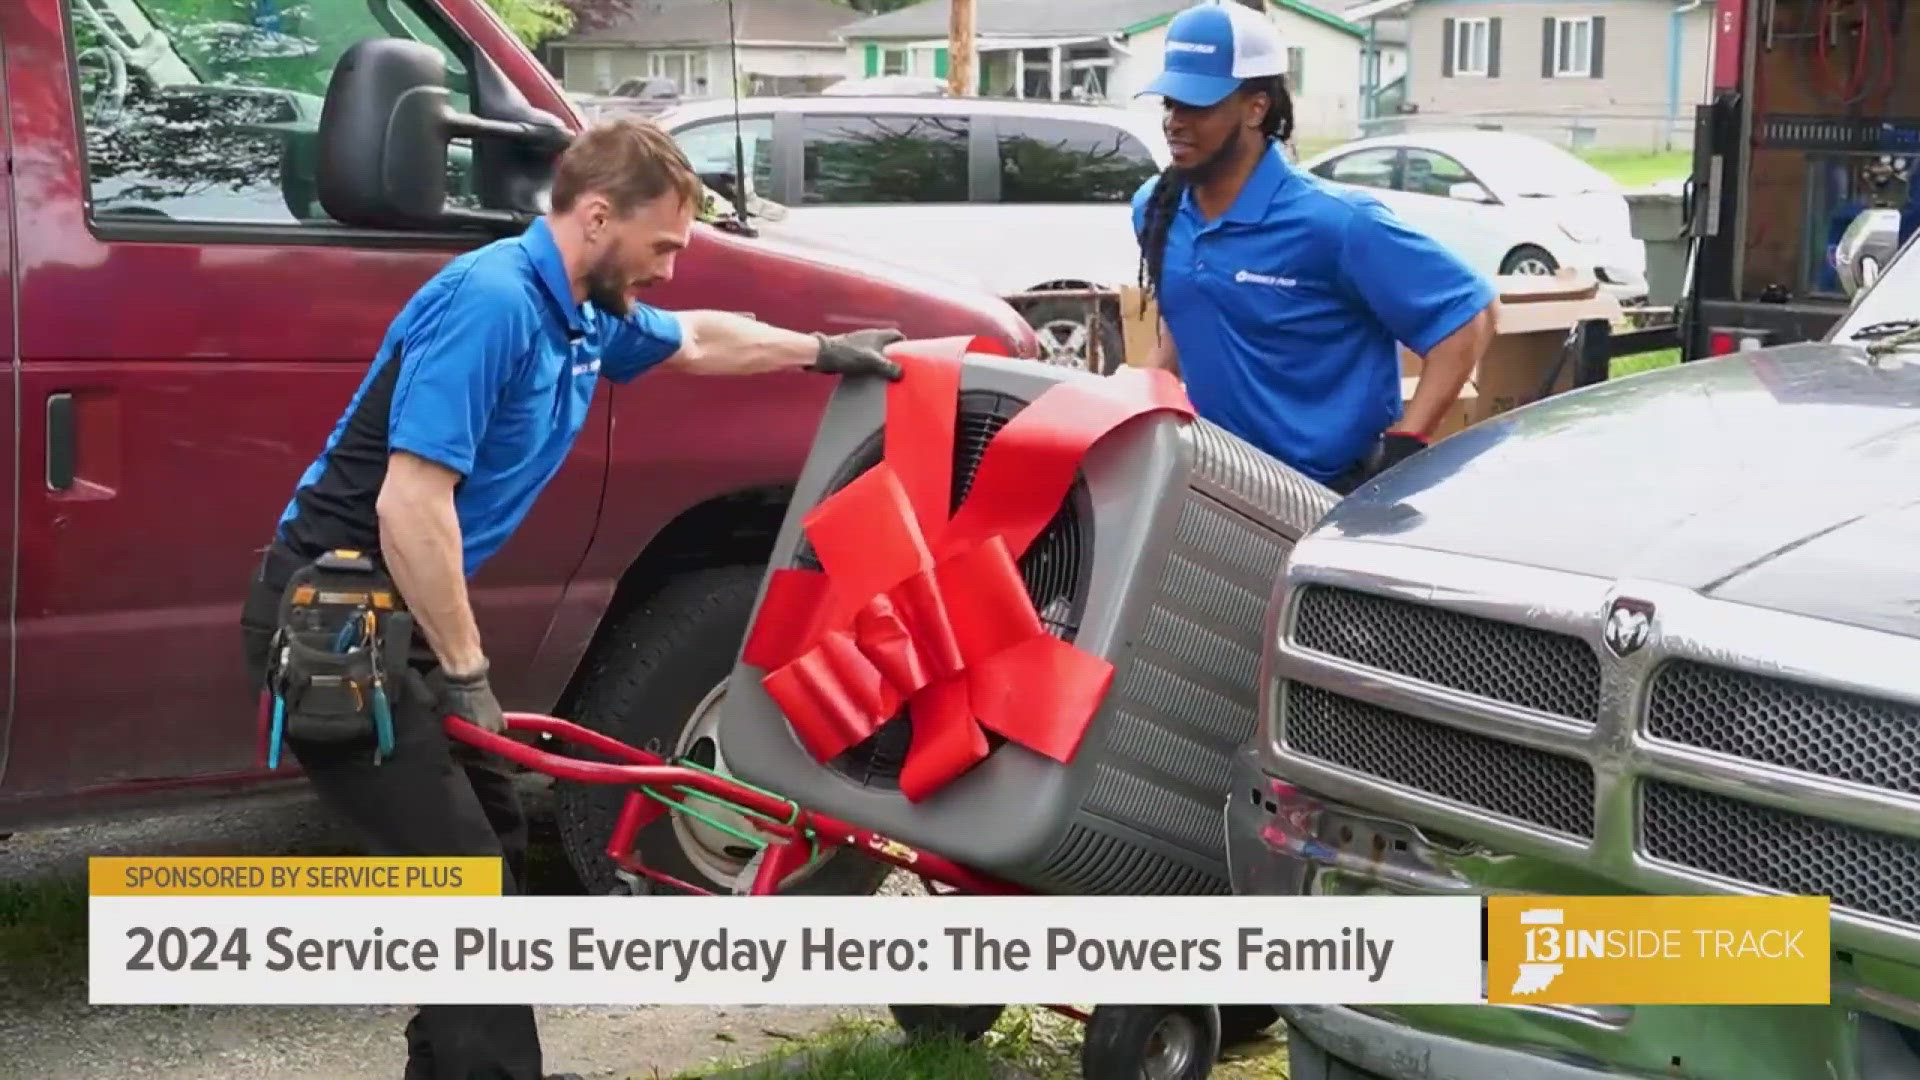 Service Plus, through its Everyday Hero program, has transformed the lives of the Powers family by providing a much-needed HVAC system.